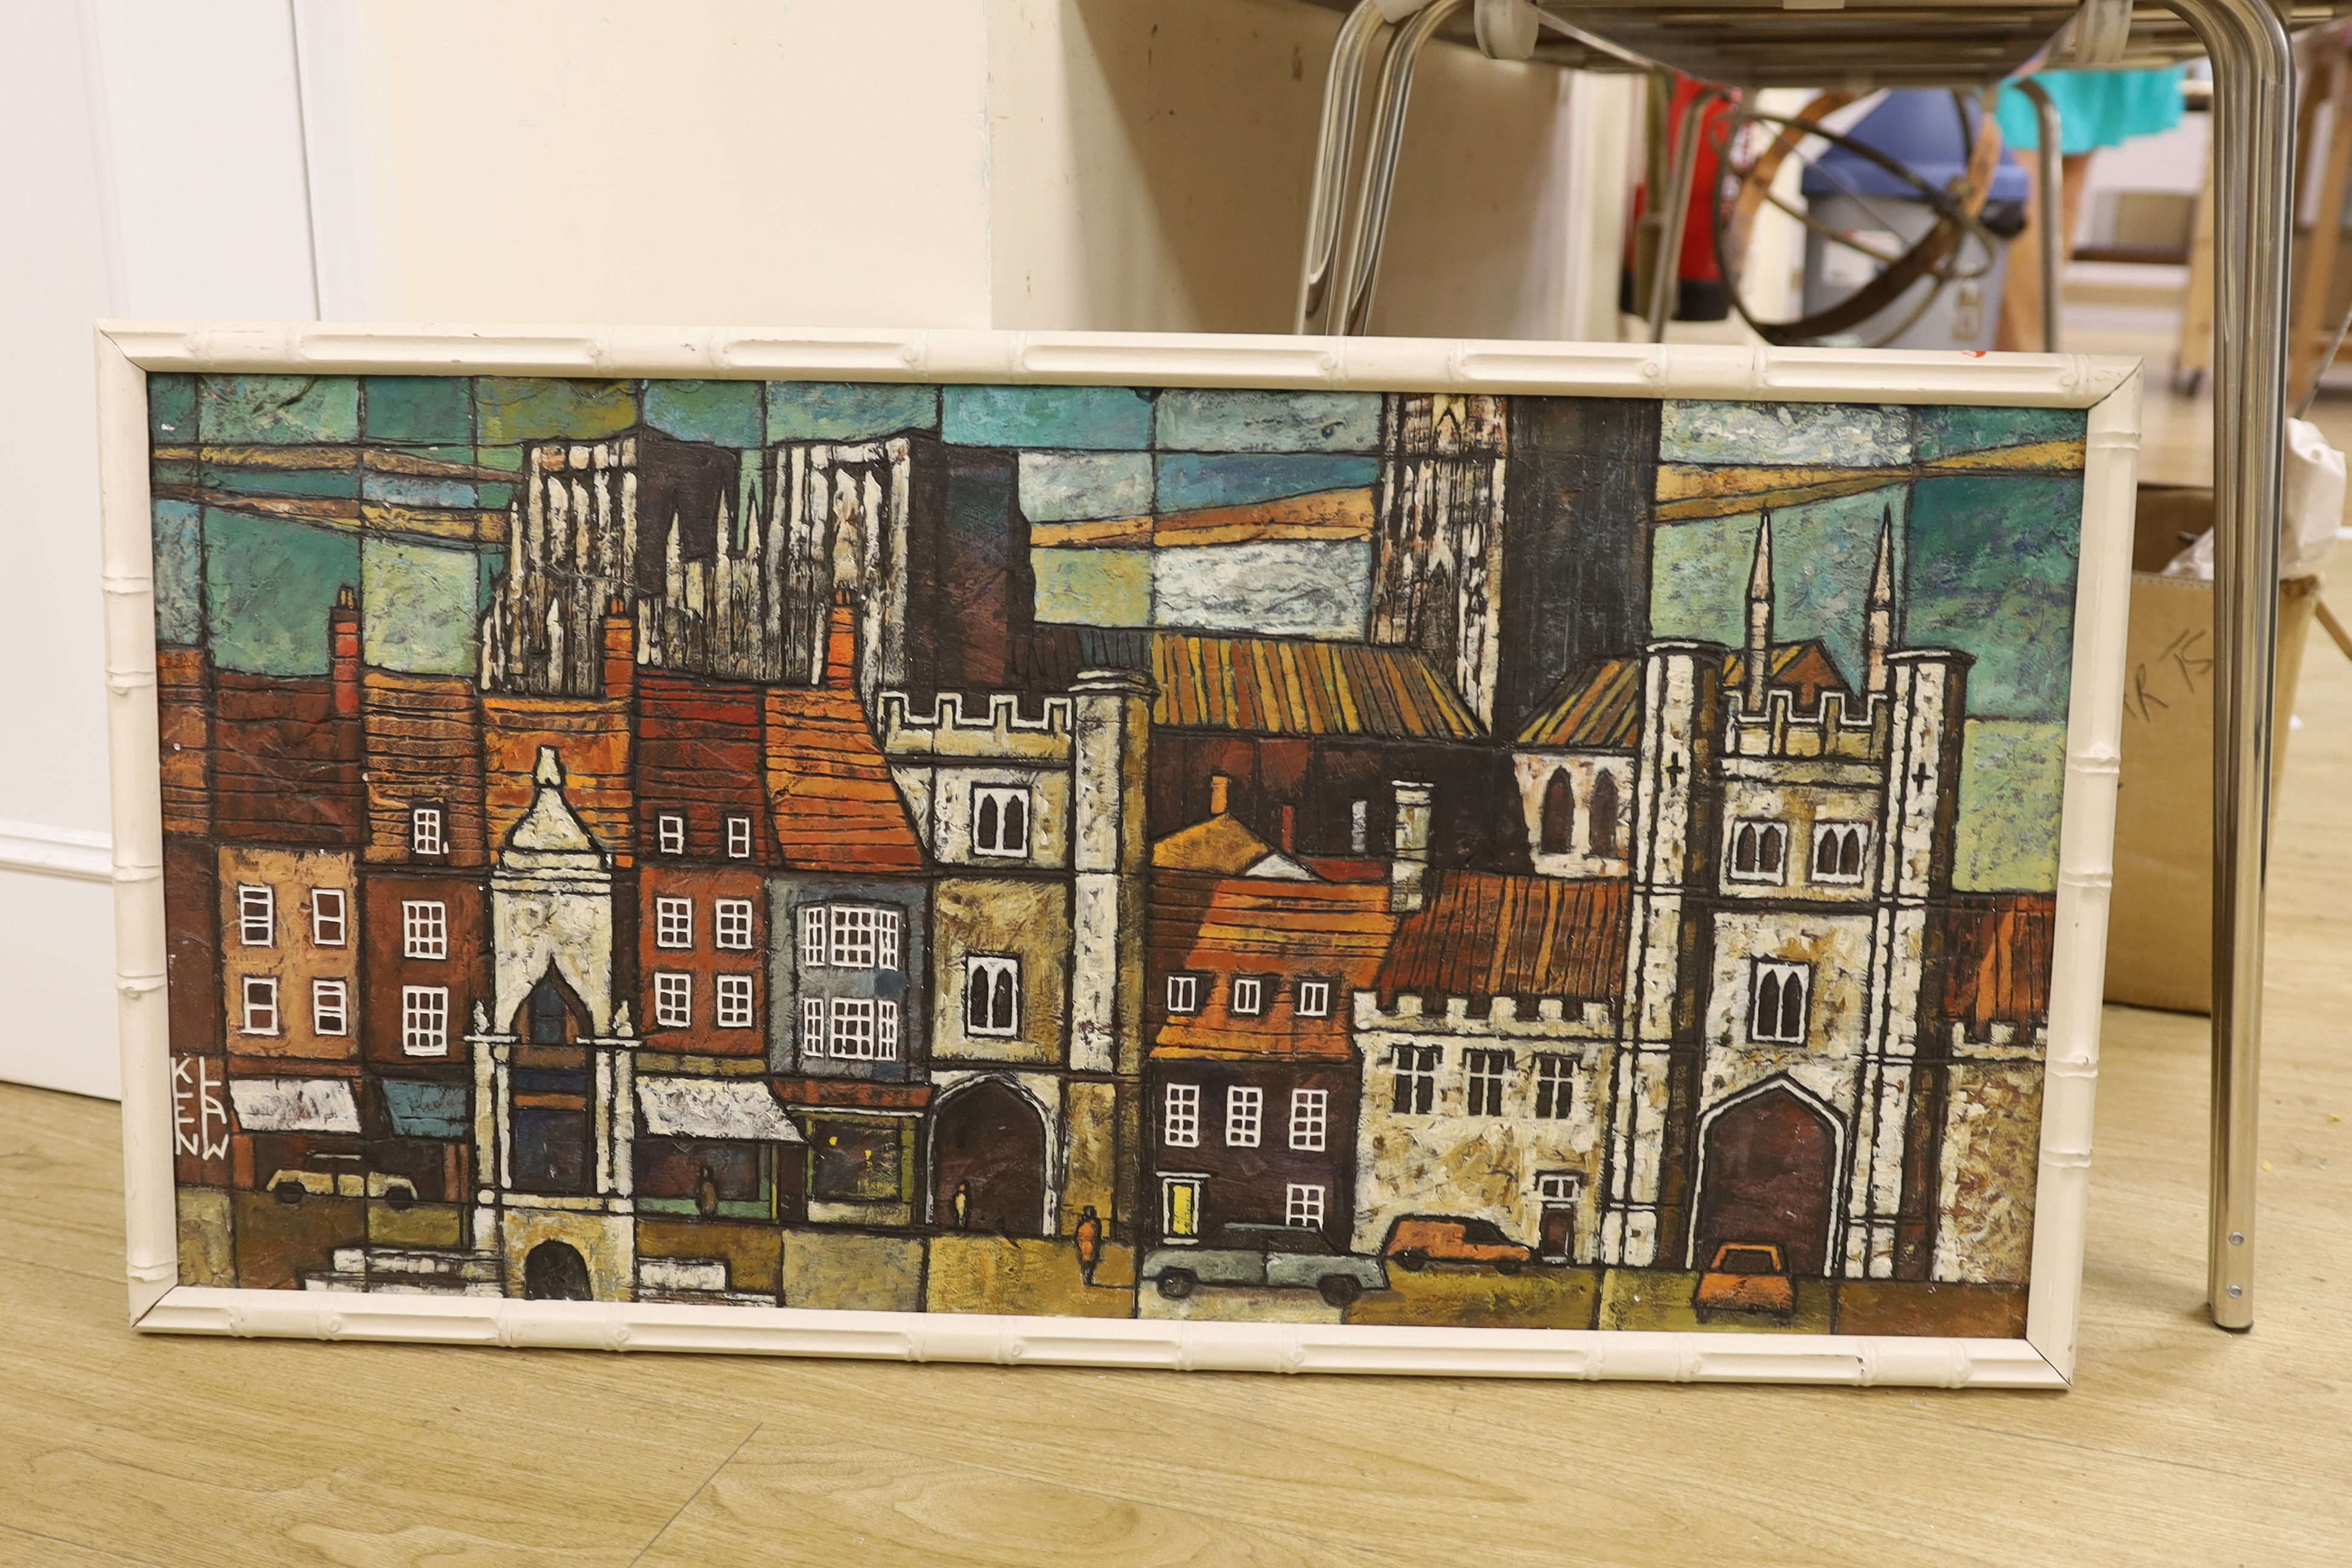 Ken Law, mixed media and oil on board, Cubist style street scene, 44 x 92cm, housed in a faux bamboo frame